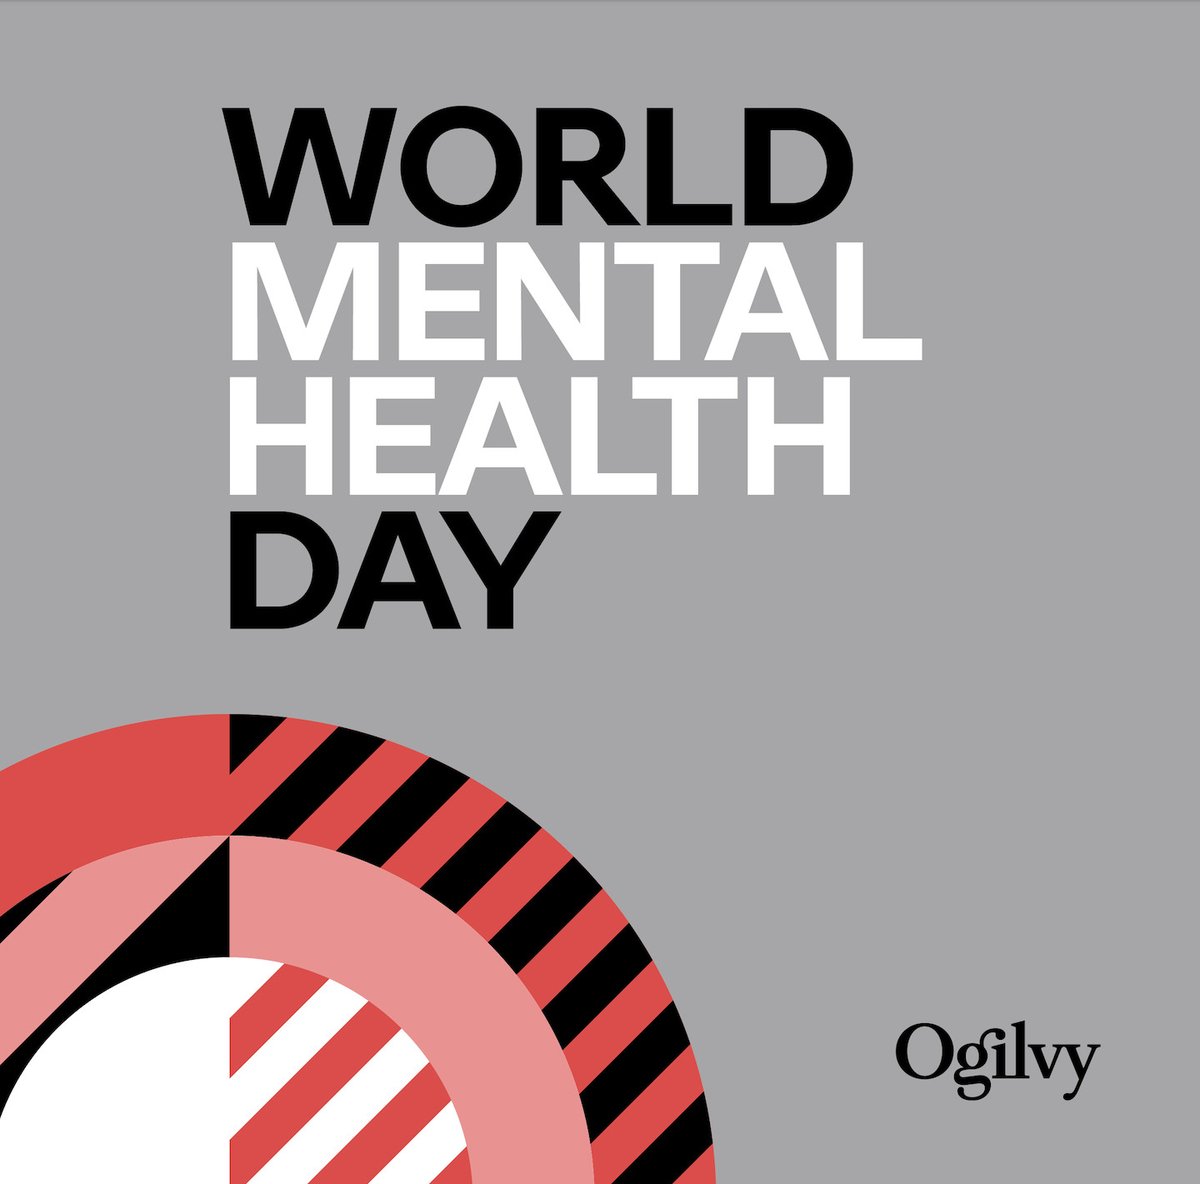 Ogilvy Health wants to wish you a very peaceful #WorldMentalHealthDay. Mental health & wellbeing should be a priority for everyone, everywhere. What do you do when you're feeling overwhelmed? Share some of your tips in the comments. #OgilvyWellness #WorldMentalHealthDay